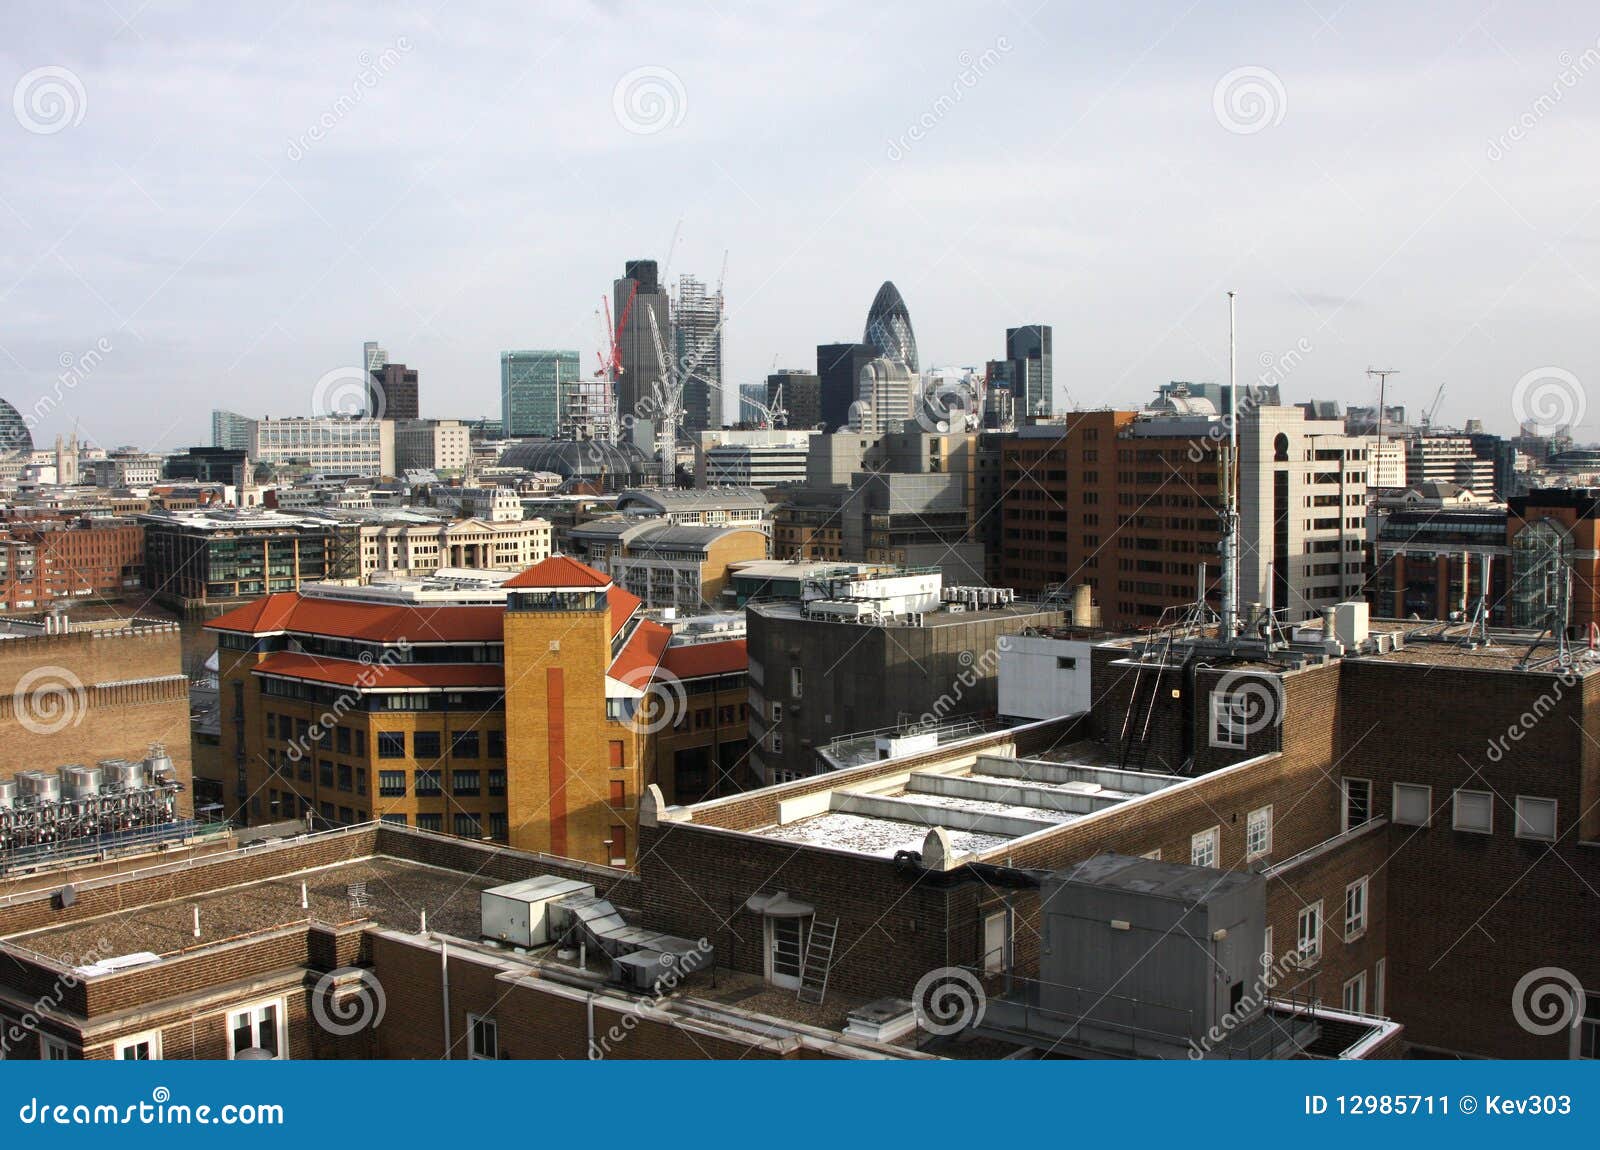 rooftops and skyline of london